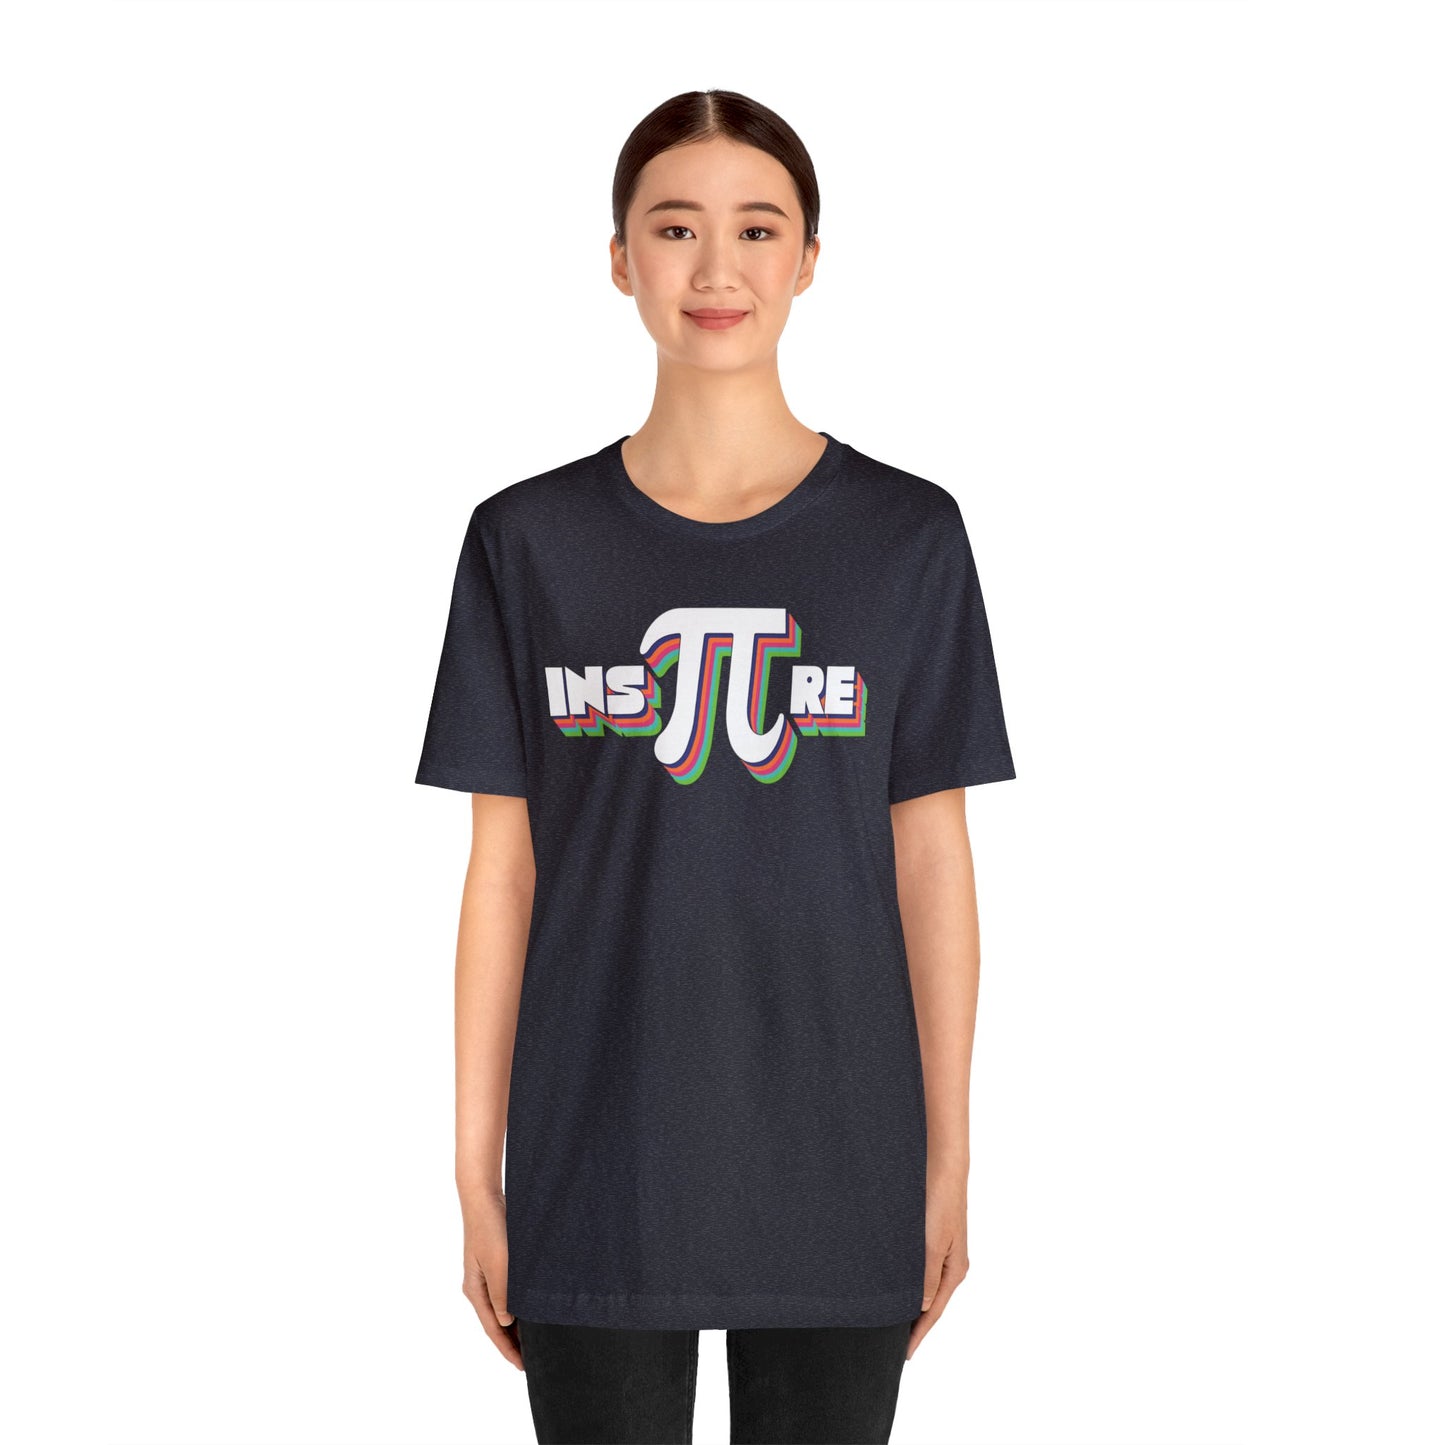 Ins-pie-re Tee for Pi Day